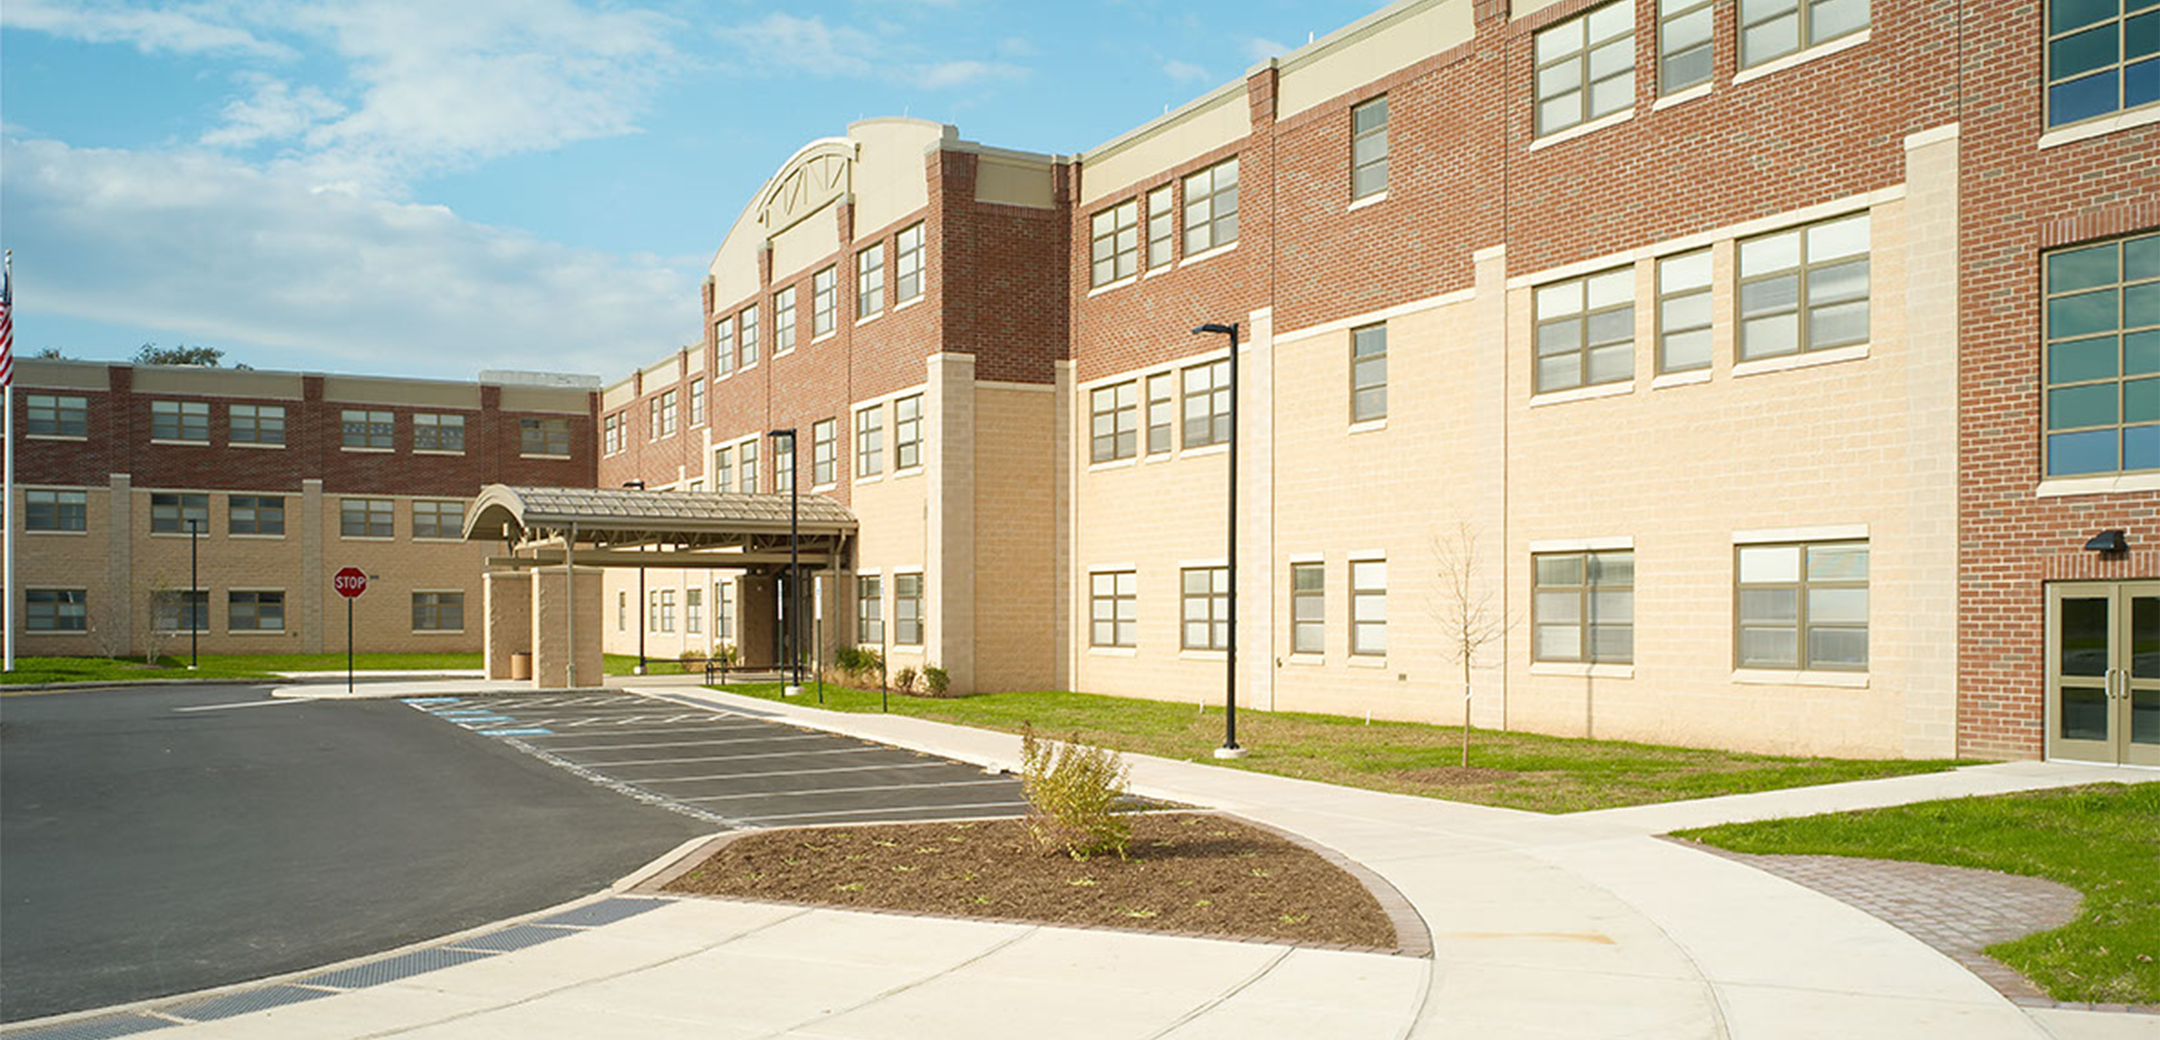 An angled view of the Phoenixville Middle School brick building showcasing the front sidewalk, side entrance and front parking lot.